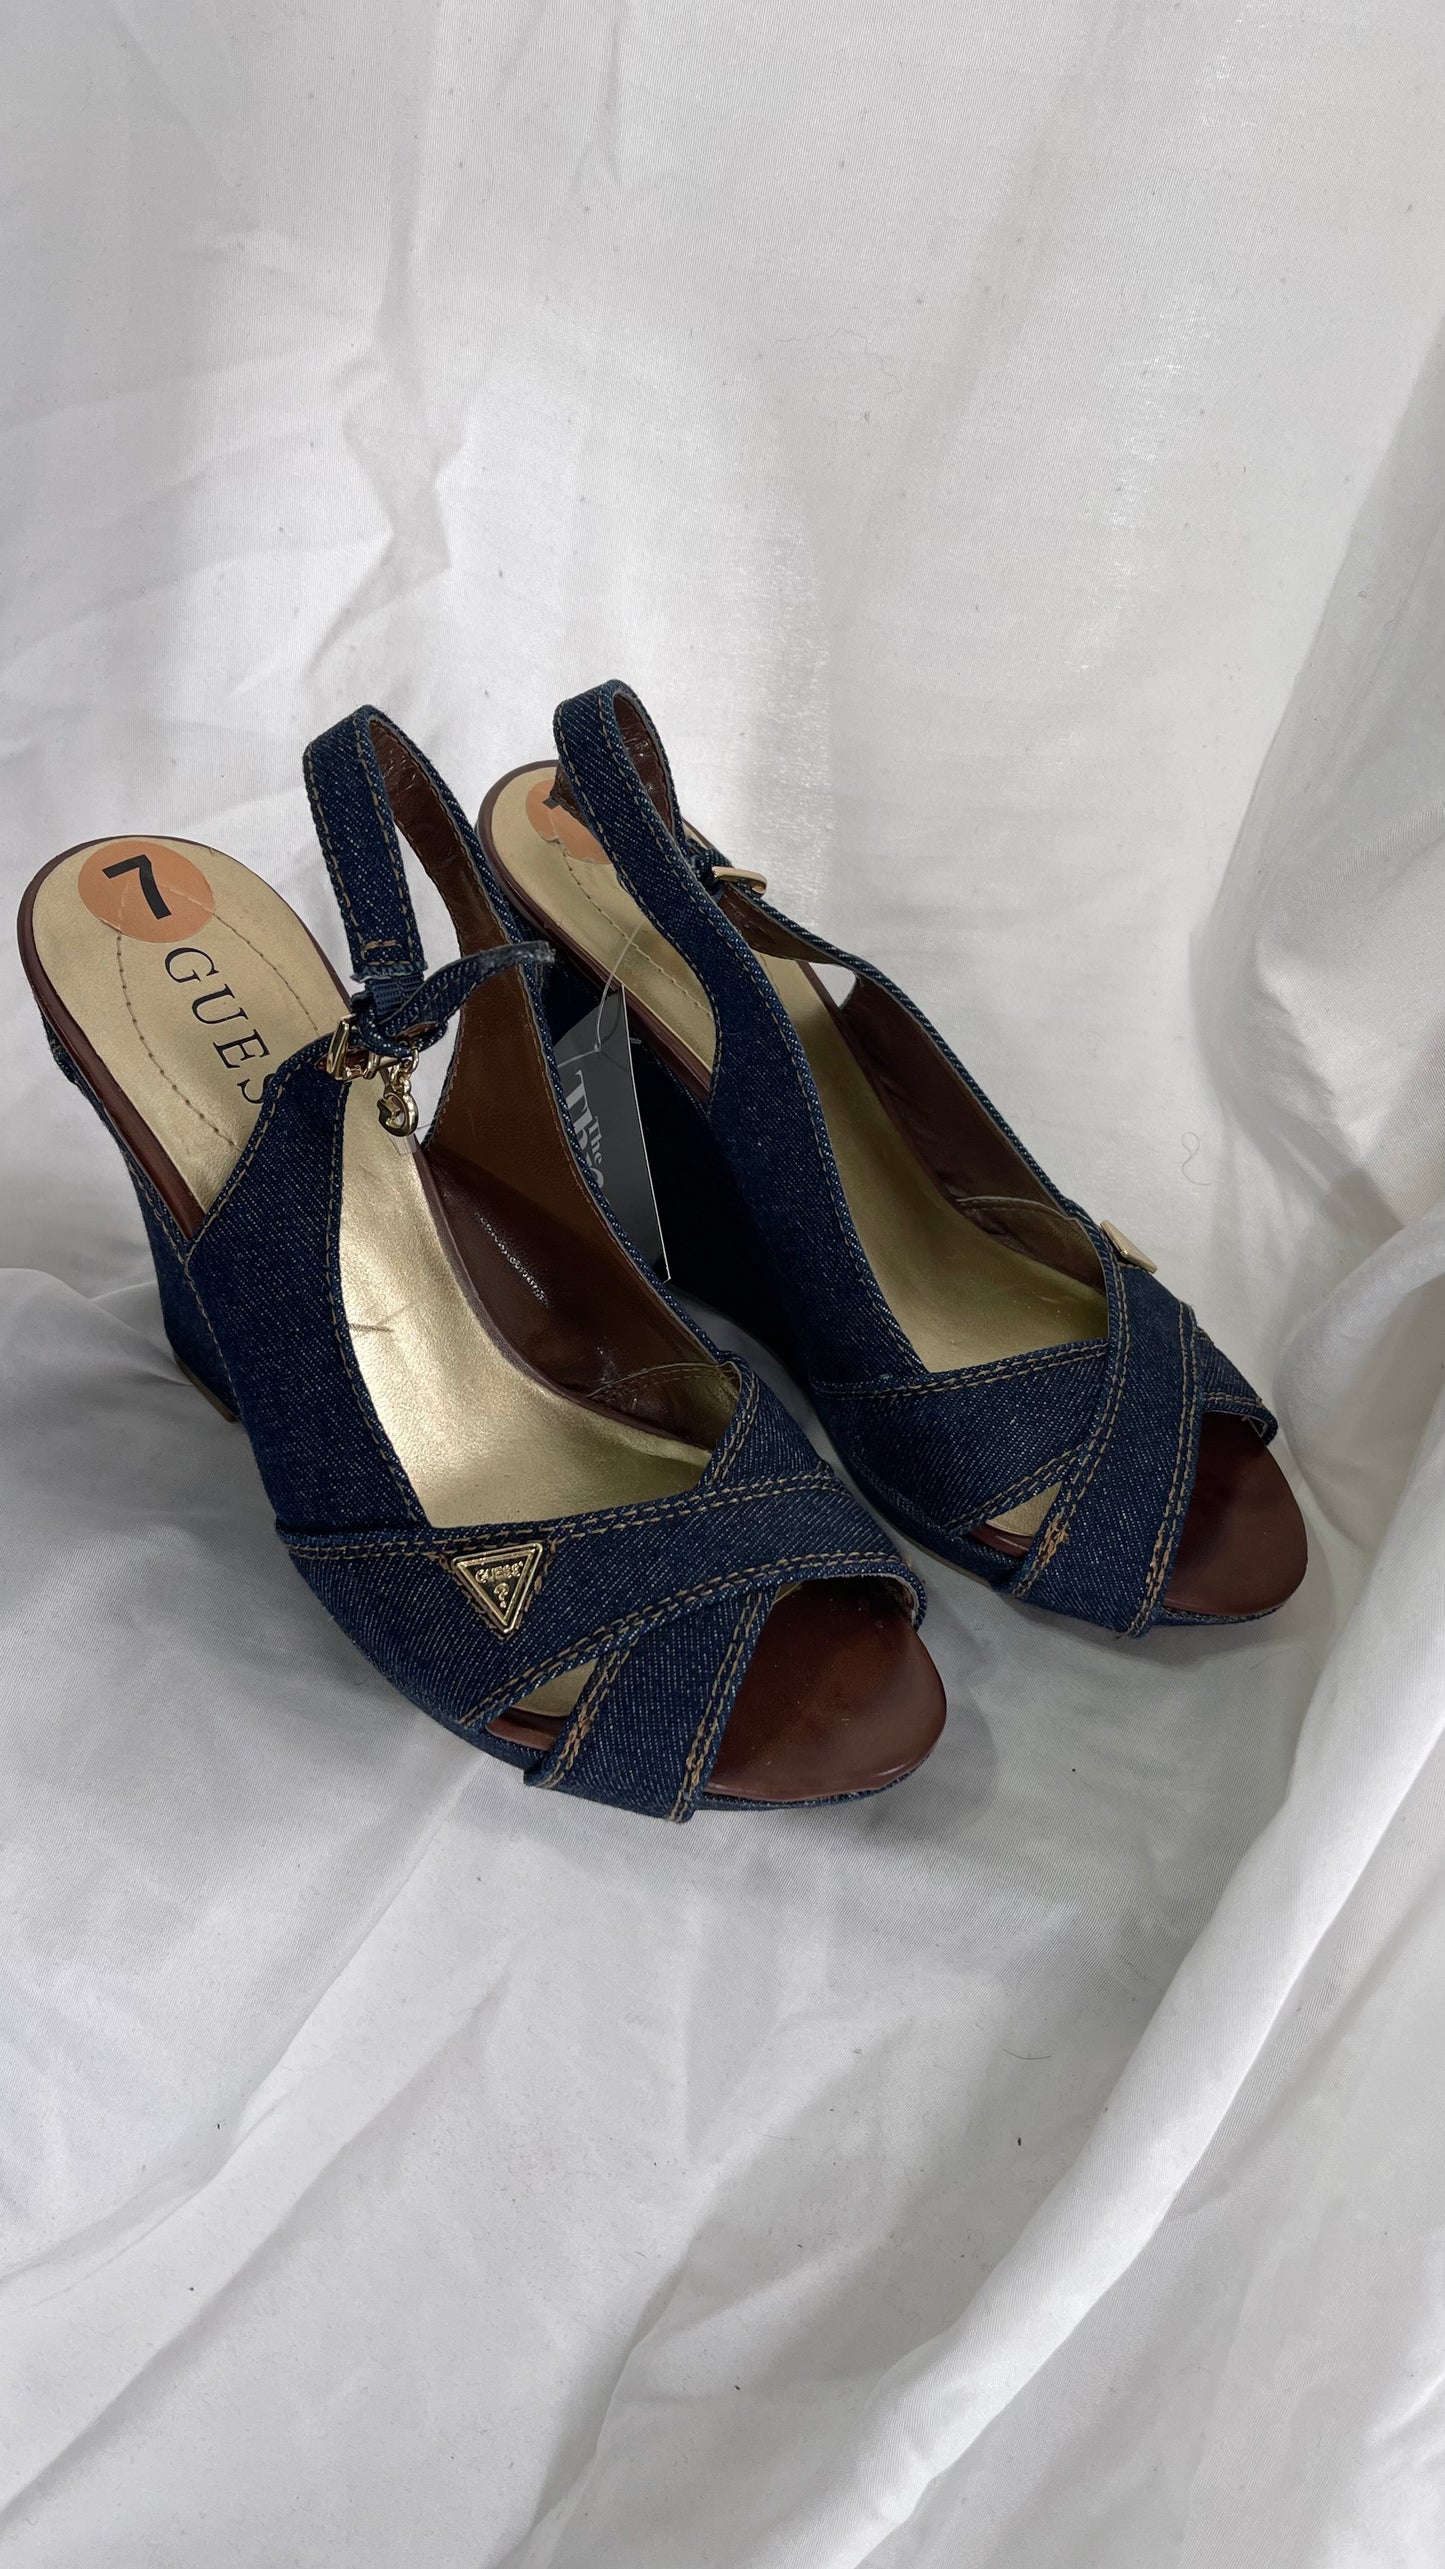 Vintage GUESS Dark Denim Jeans Wedges with Slingback Strap and Iconic Logo (7)